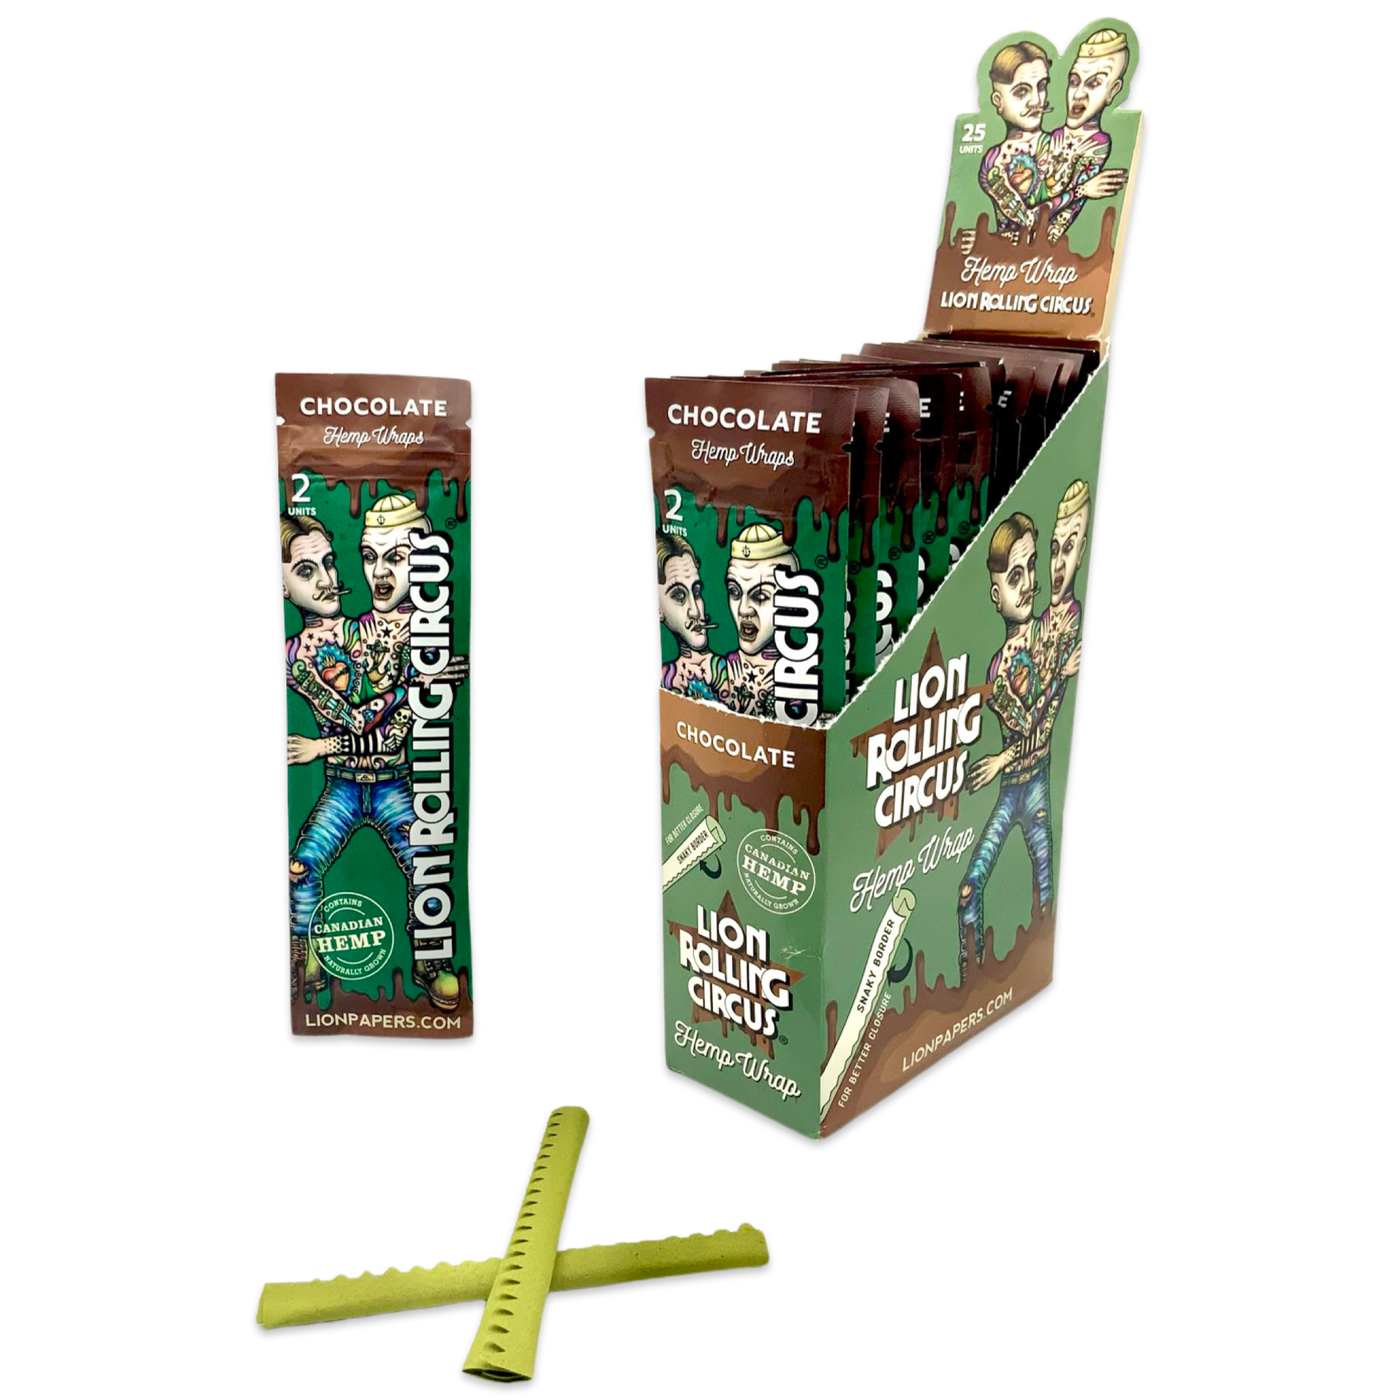 Hemp Wrap Chocolate - Lion Rolling Circus - Bloommart Colombia